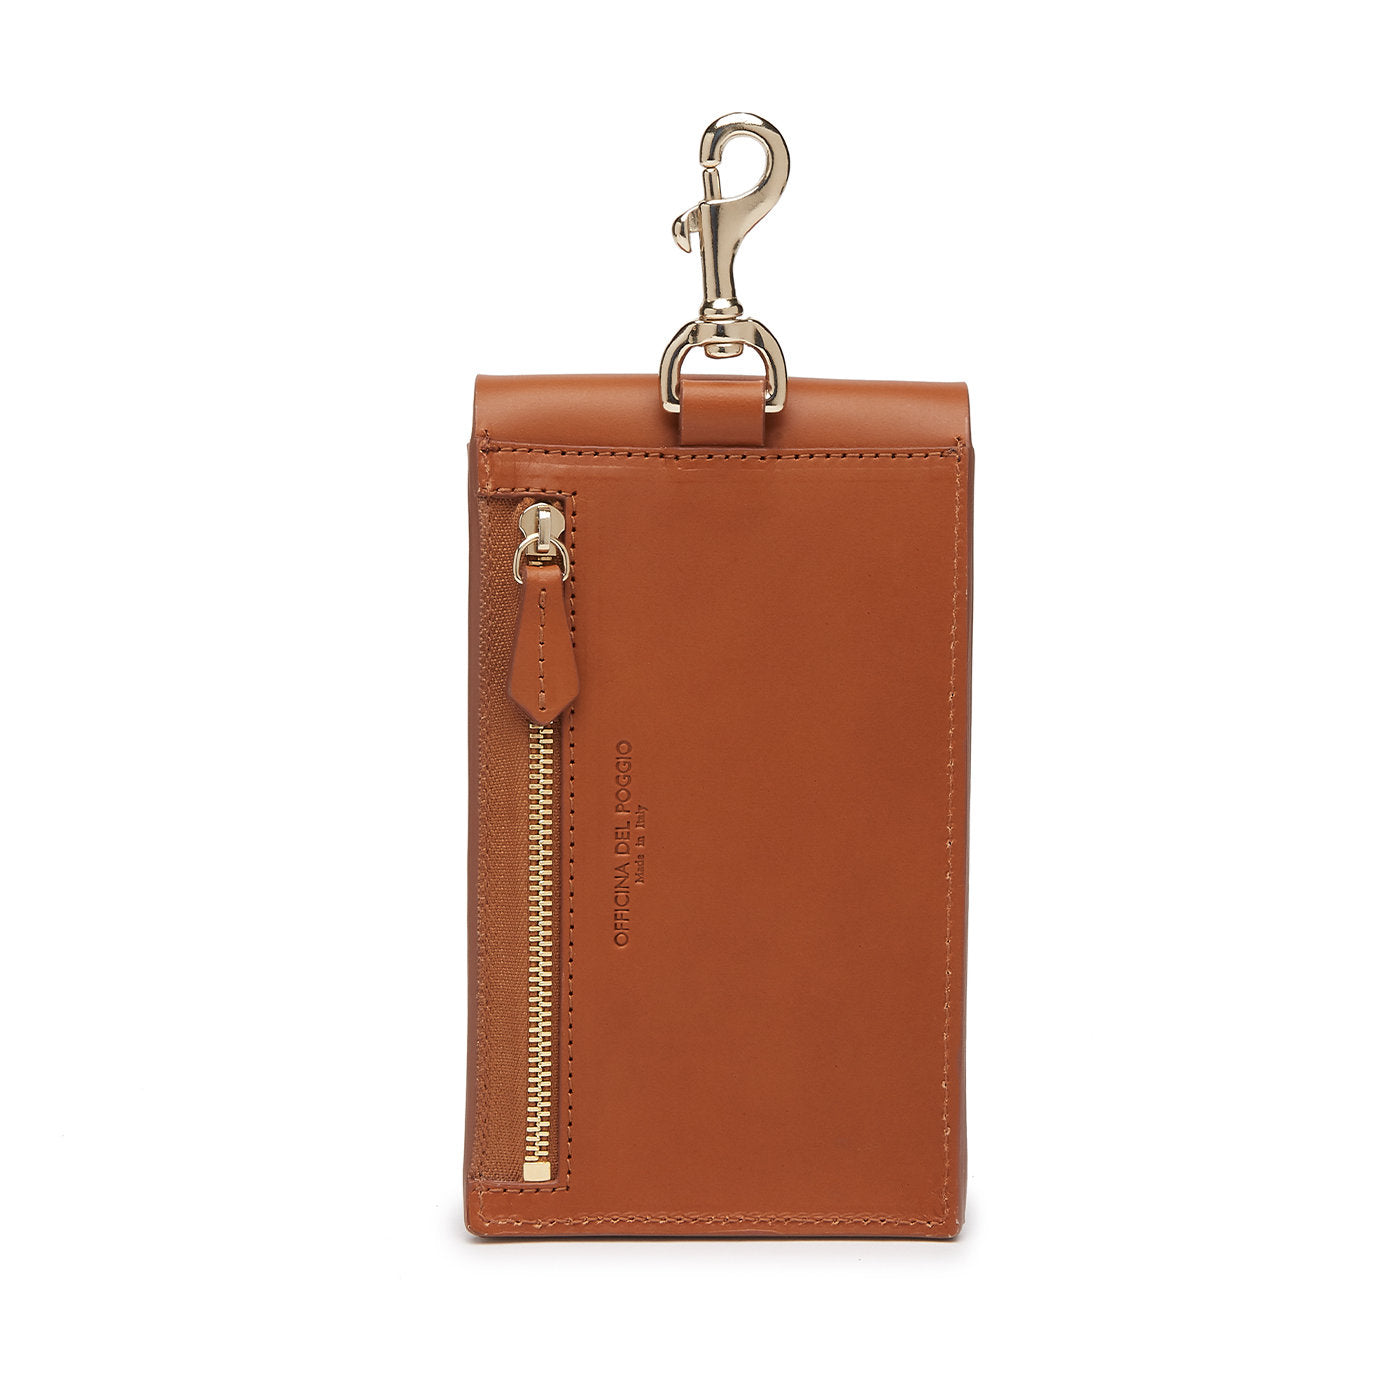 Tan Leather Phone Pouch - Alternative view 1